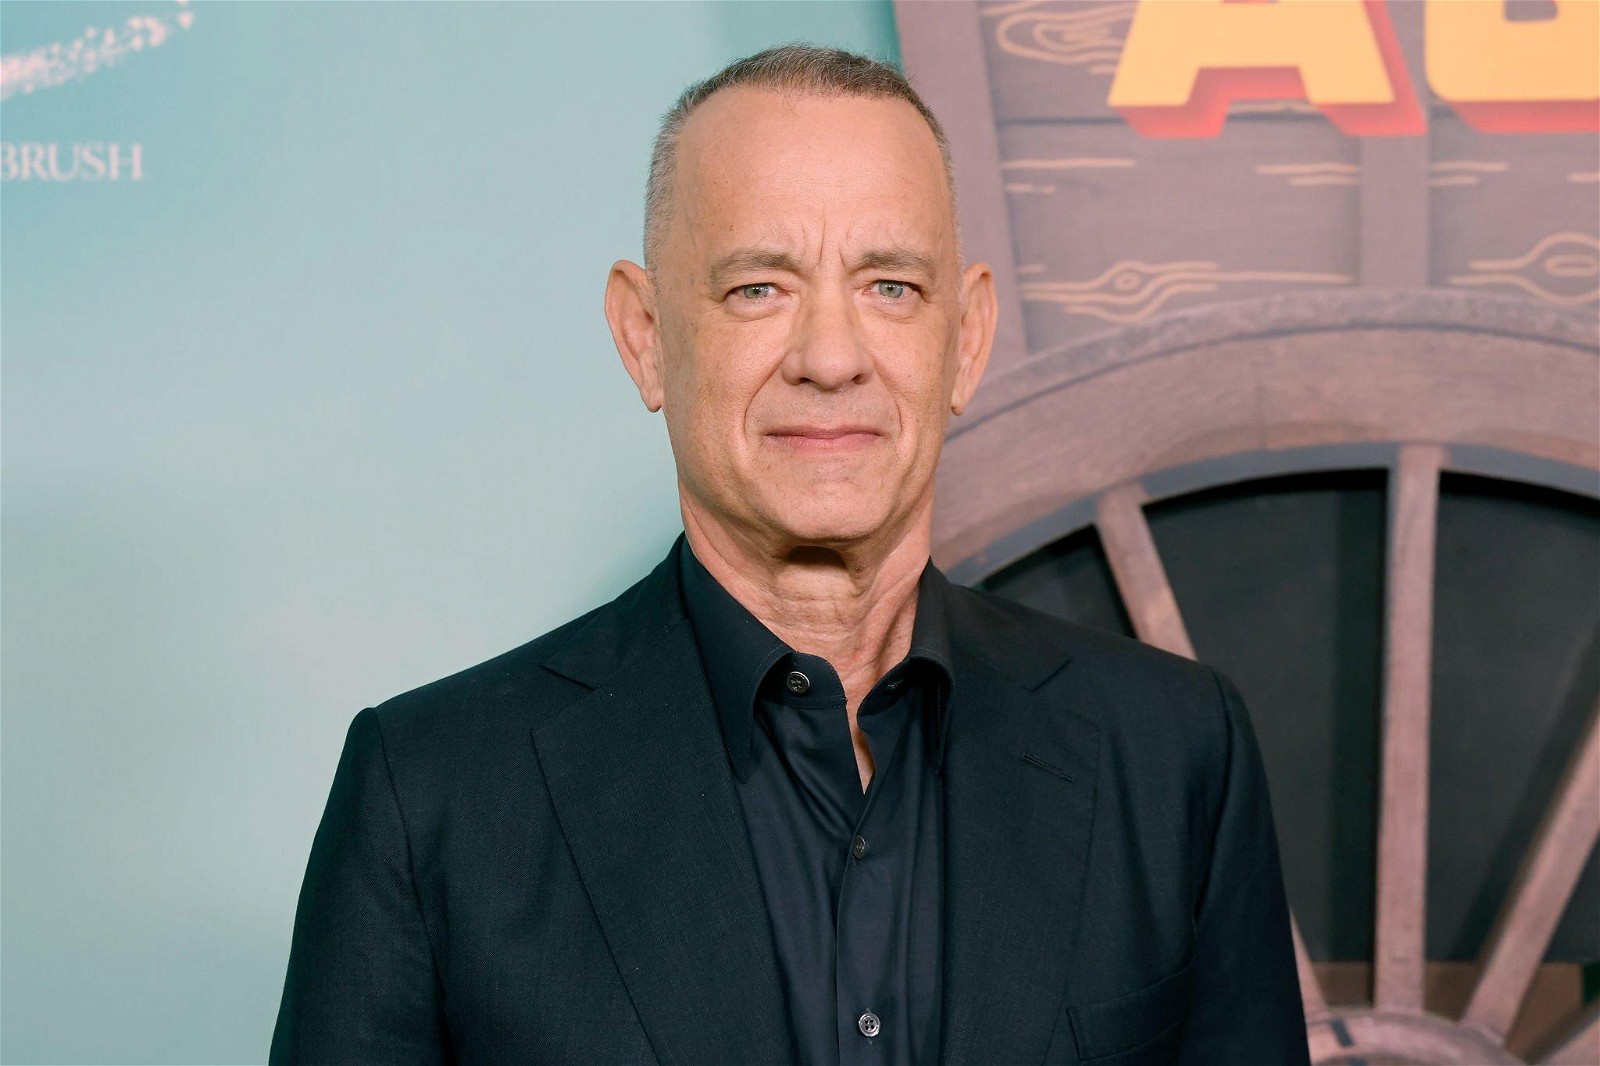 Tom Hanks at an event